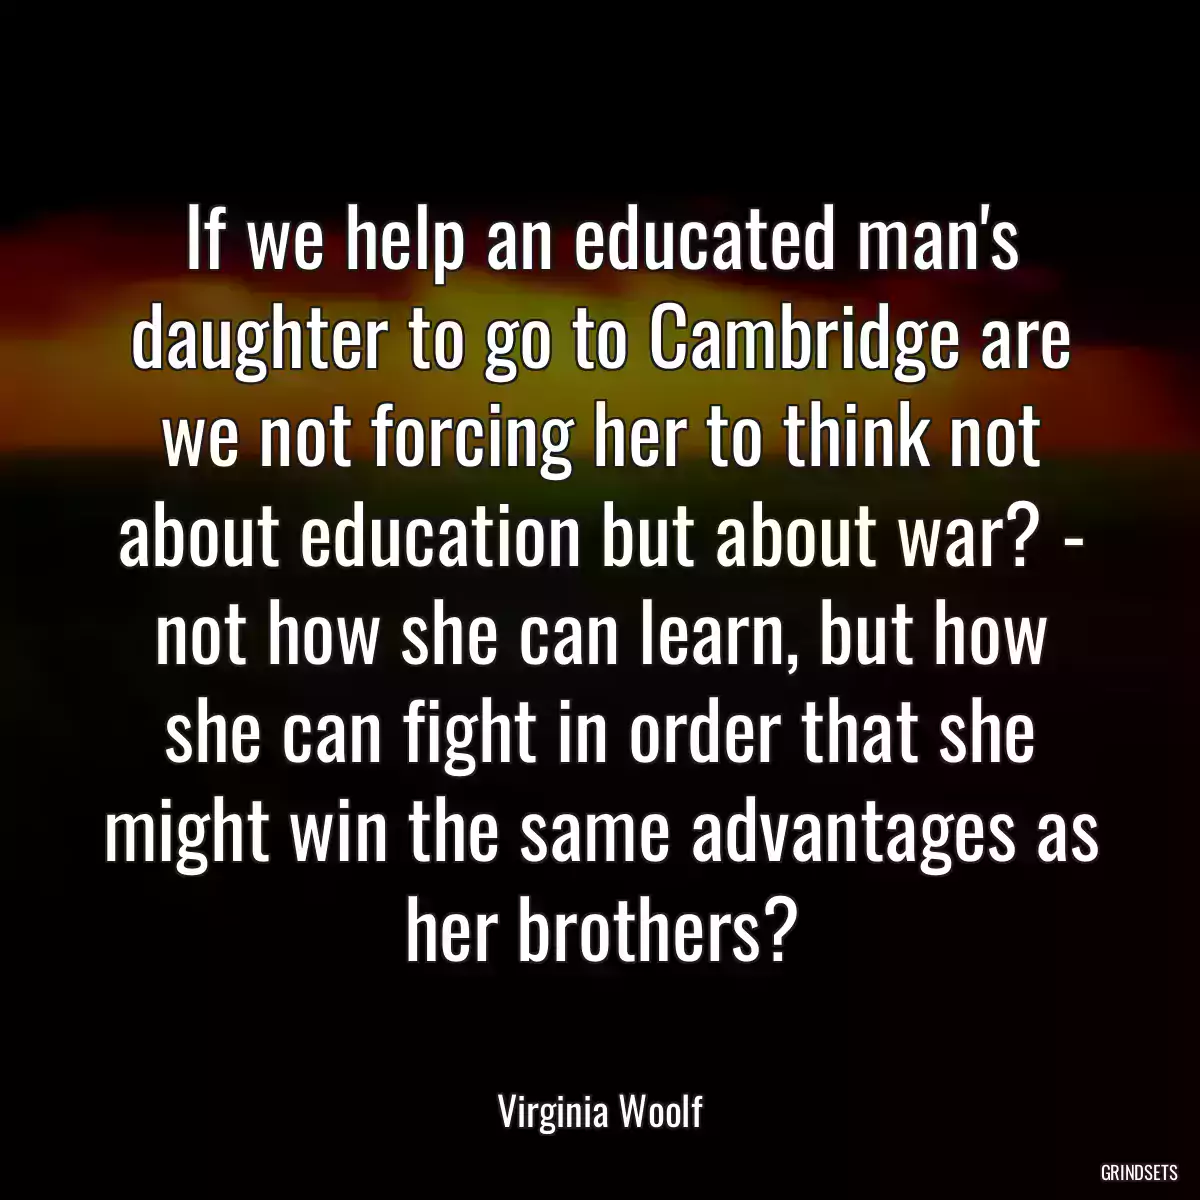 If we help an educated man\'s daughter to go to Cambridge are we not forcing her to think not about education but about war? - not how she can learn, but how she can fight in order that she might win the same advantages as her brothers?